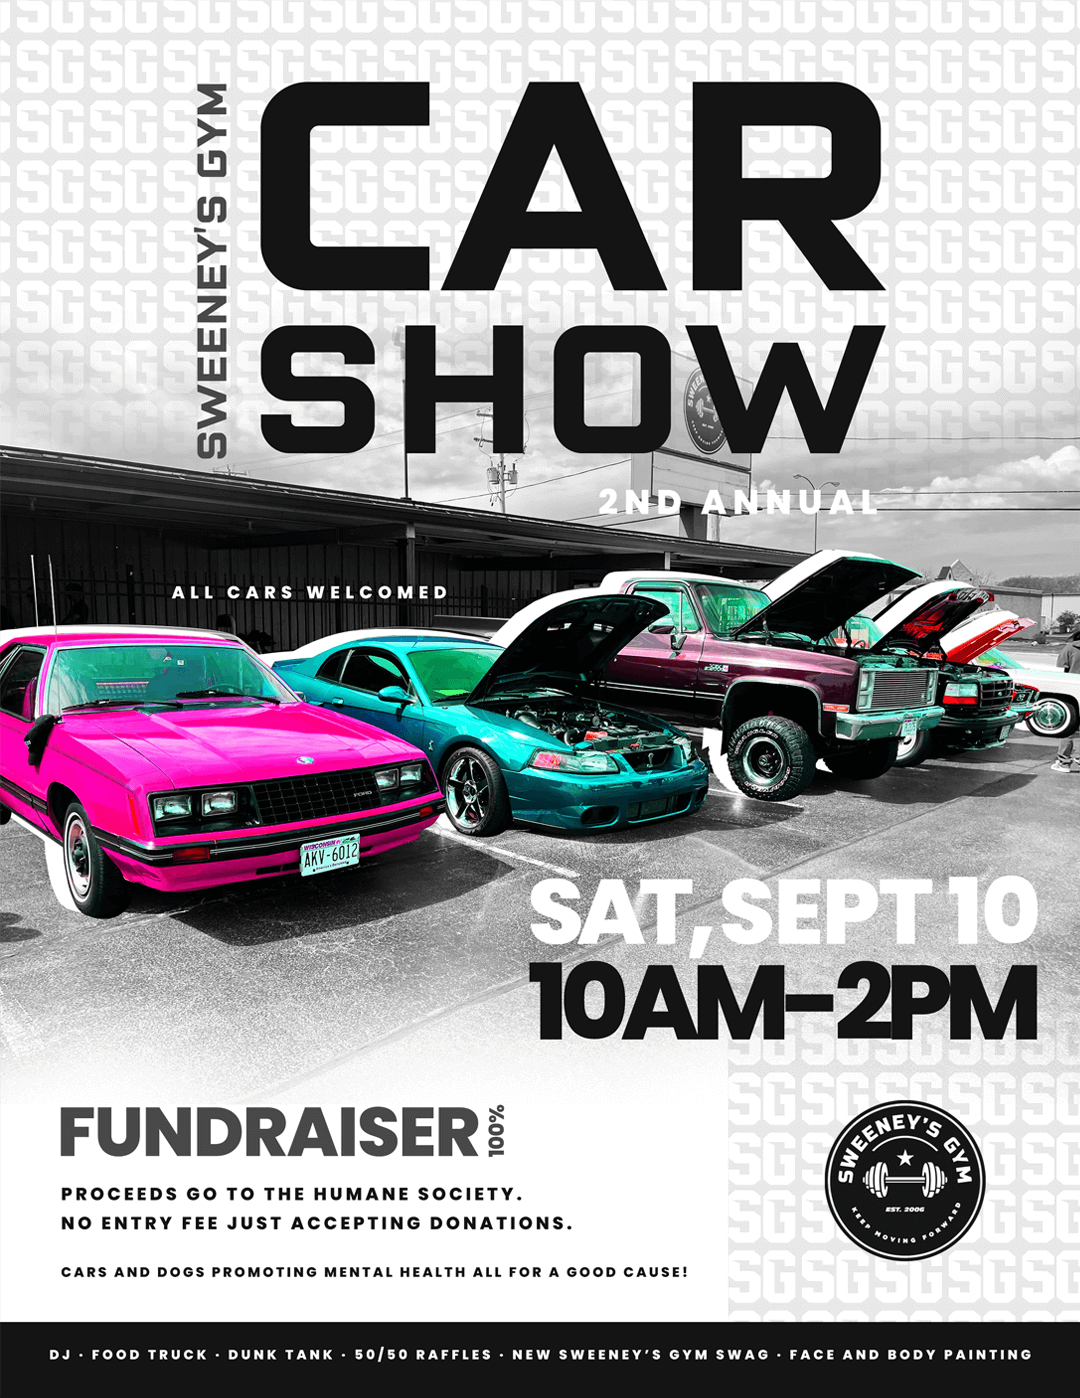 2nd Annual Sweeney's Gym Car Show Fundraiser Sept. 10, 2022